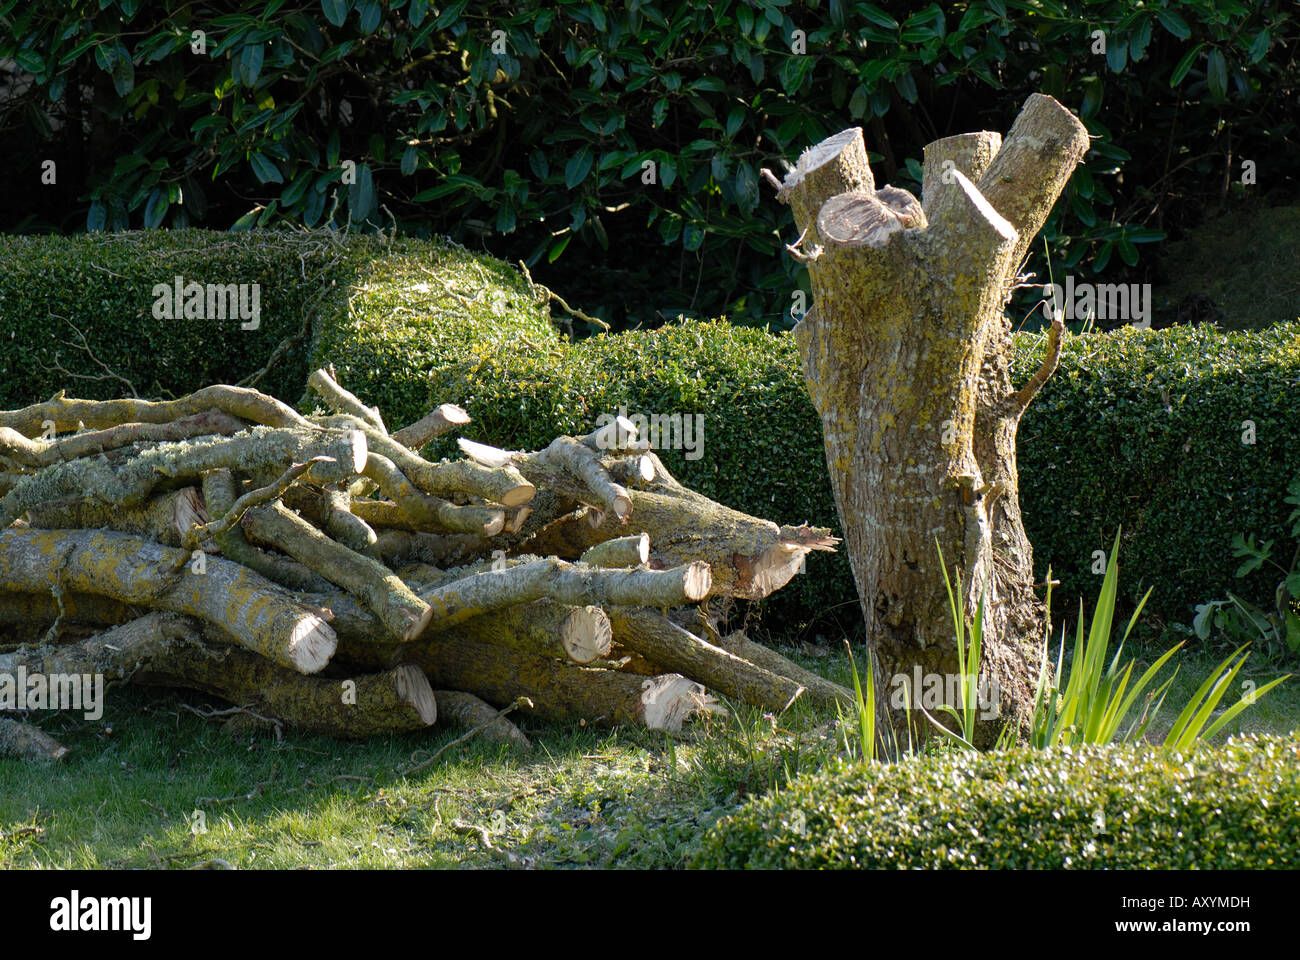 Contorted willow in a garden killed by disease and felled Stock Photo